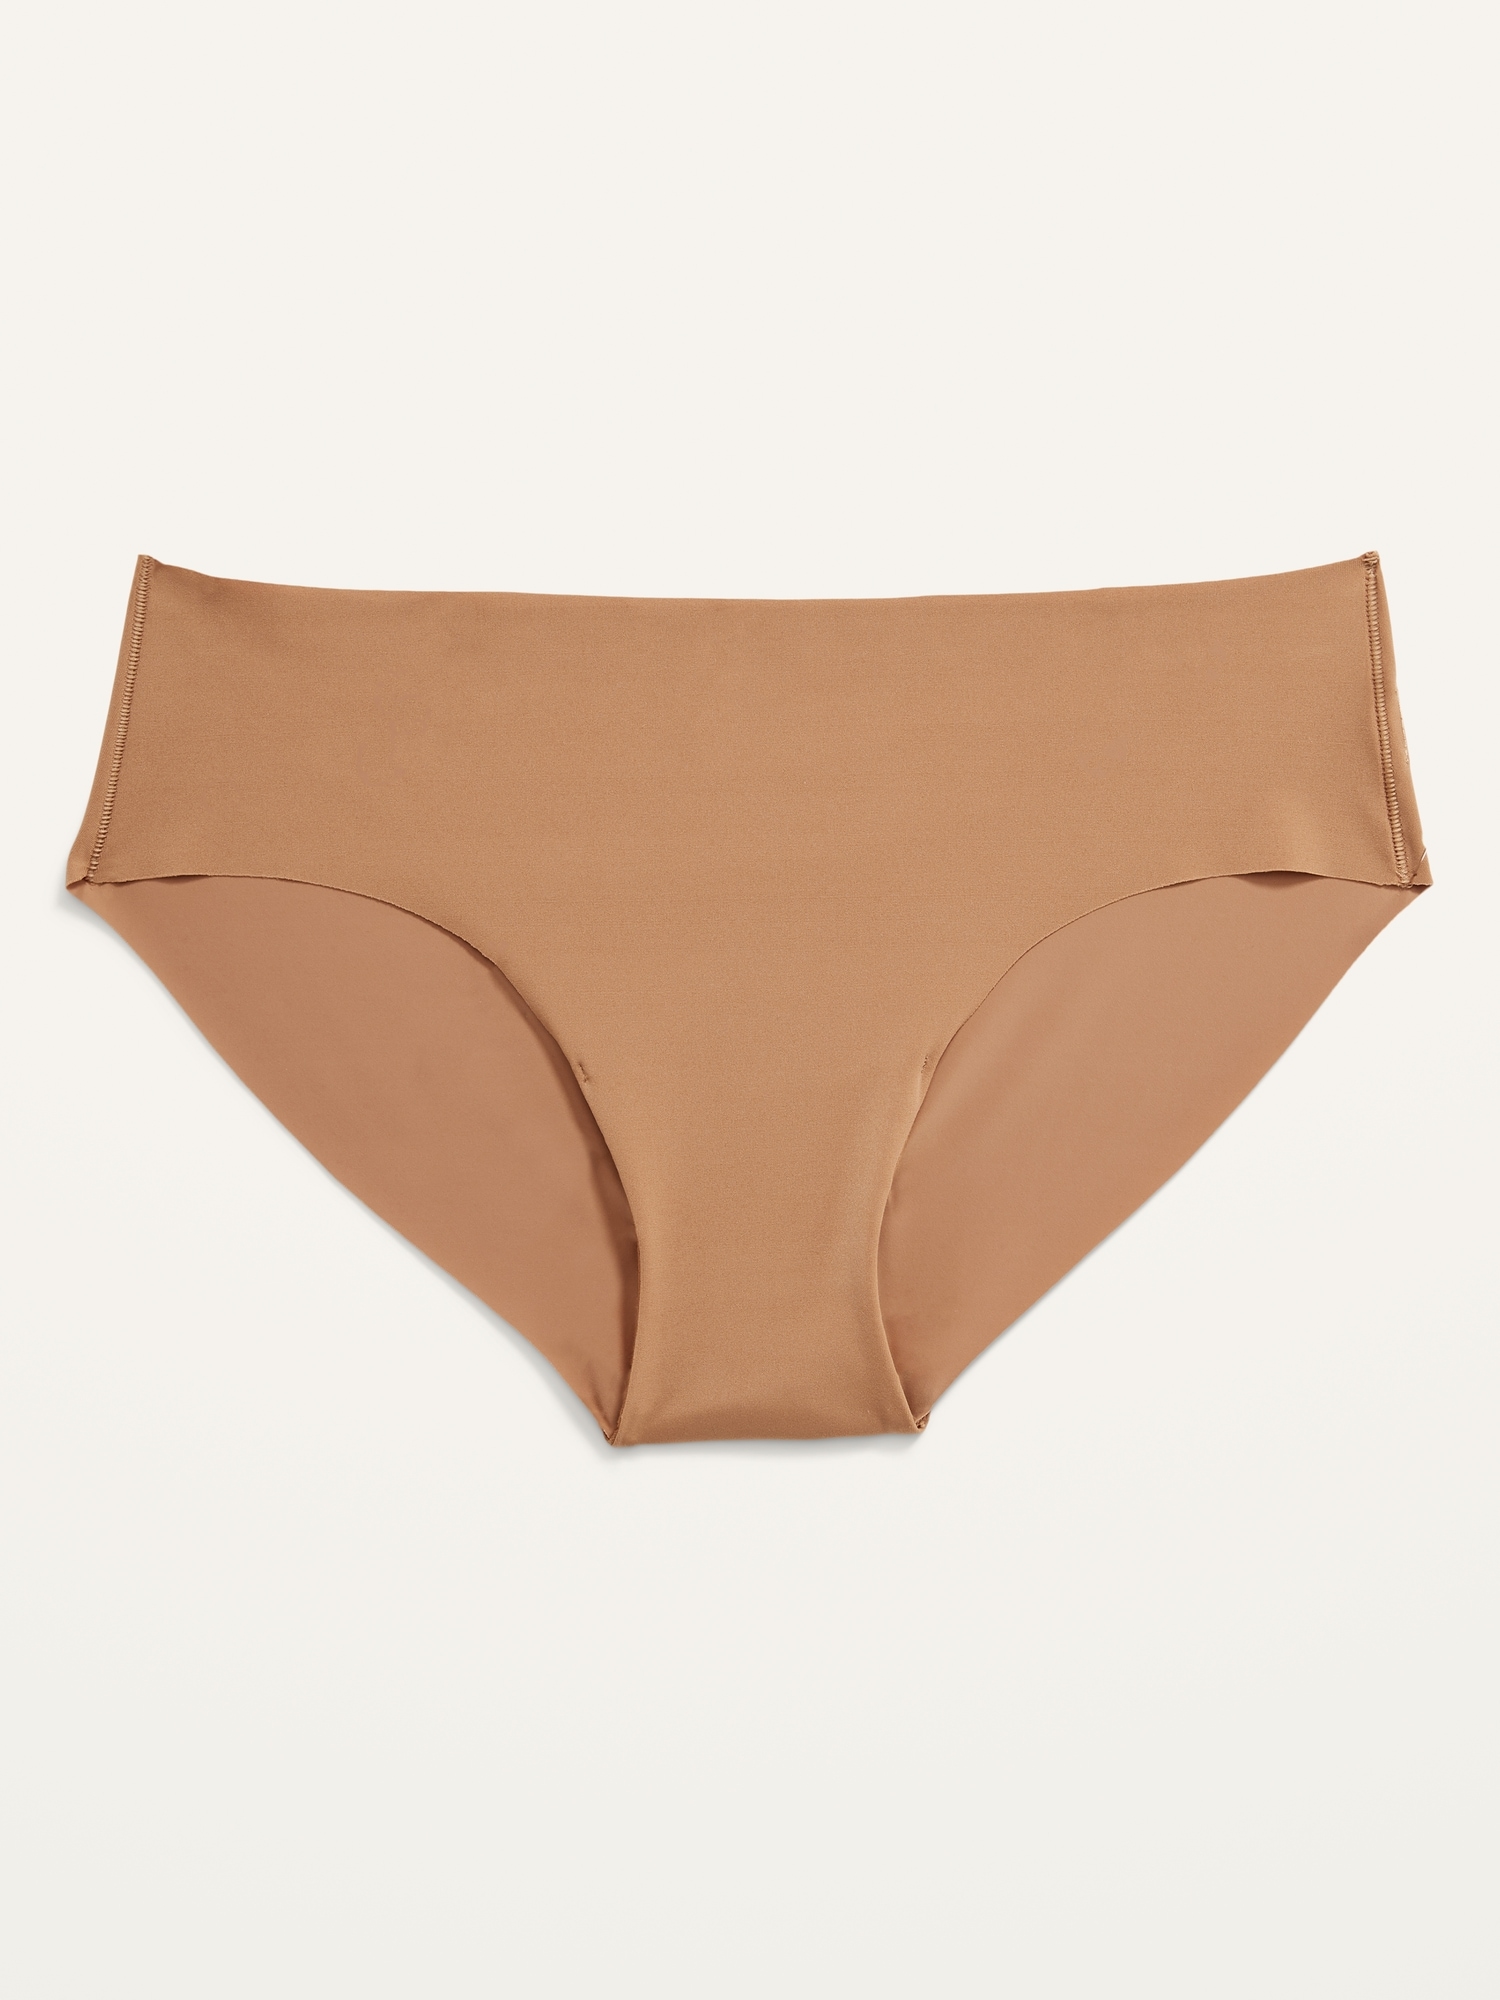 Old Navy Soft-Knit No-Show Hipster Underwear for Women brown. 1